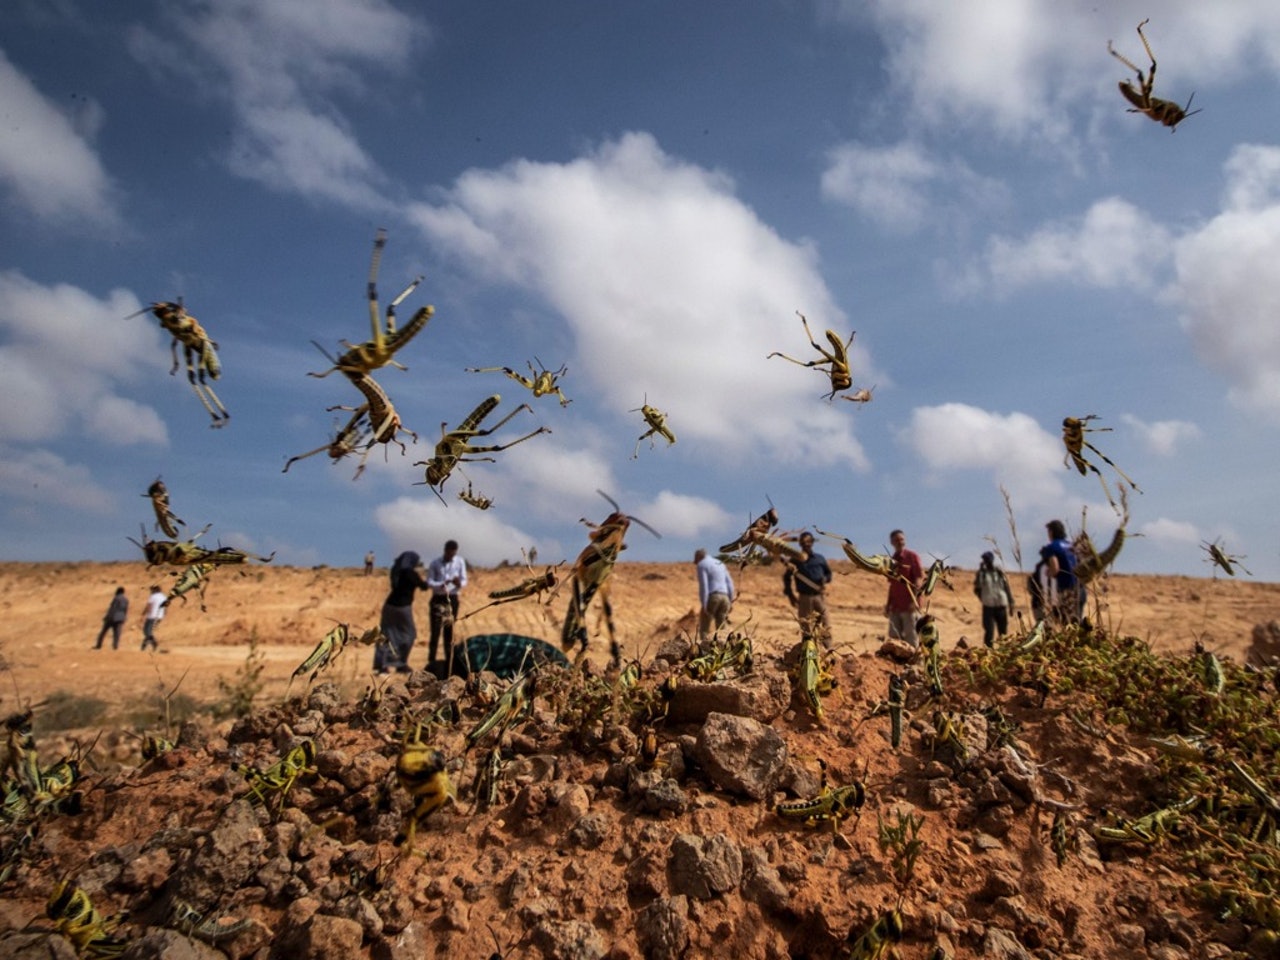 Ministry of Agriculture: the situation with locusts is complicated